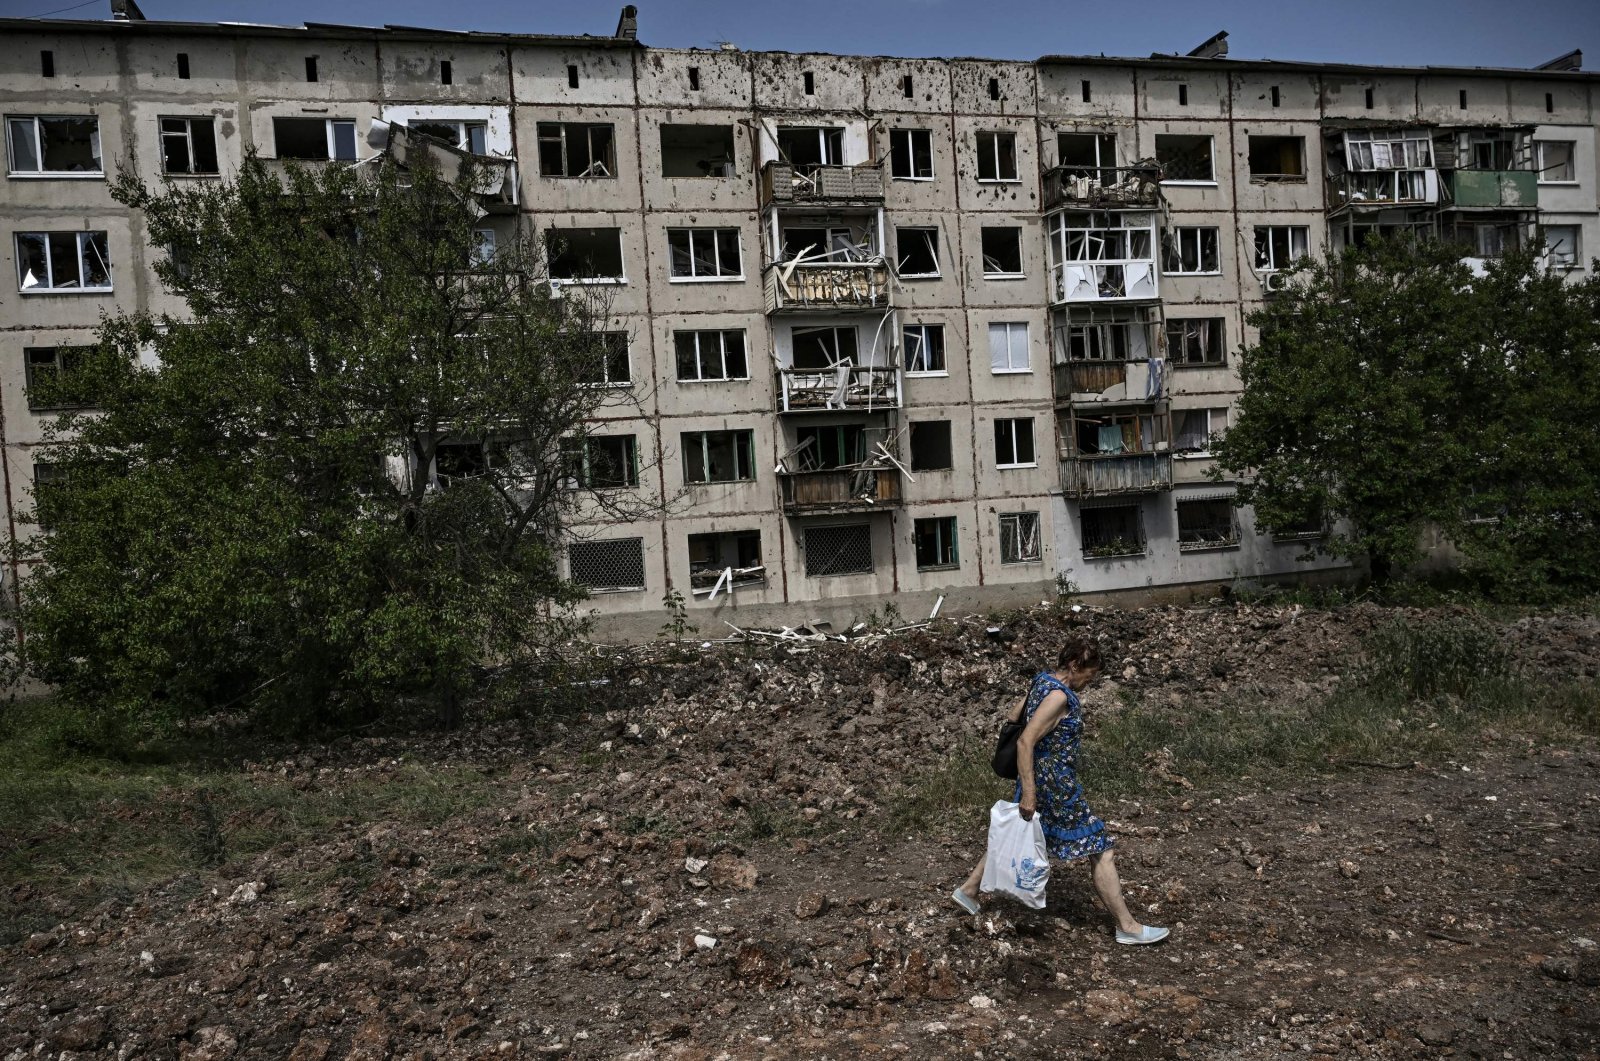 A woman walks in front of a damaged apartment building after a missile strike in the city of Soledar, in the eastern Ukrainian region of Donbass, June 4, 2022. (AFP Photo)